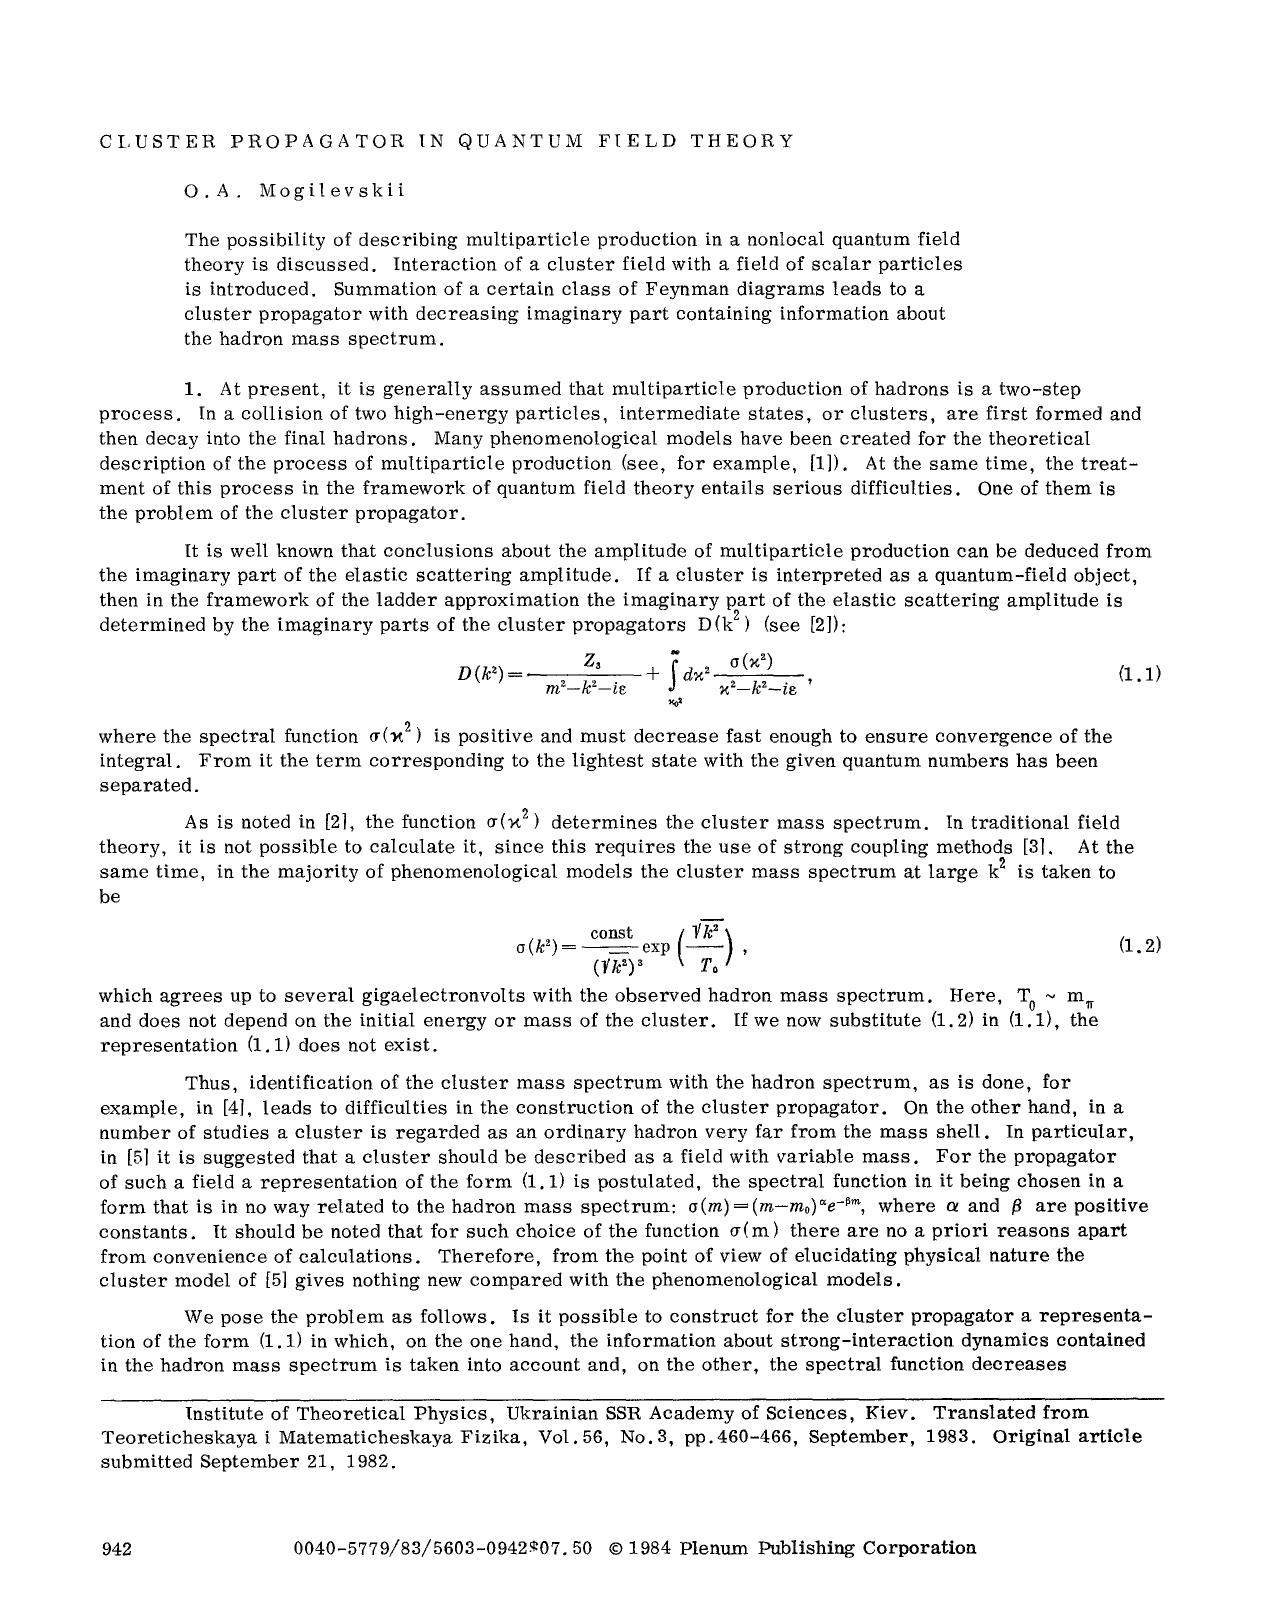 Cluster propagator in quantum field theory by Unknown